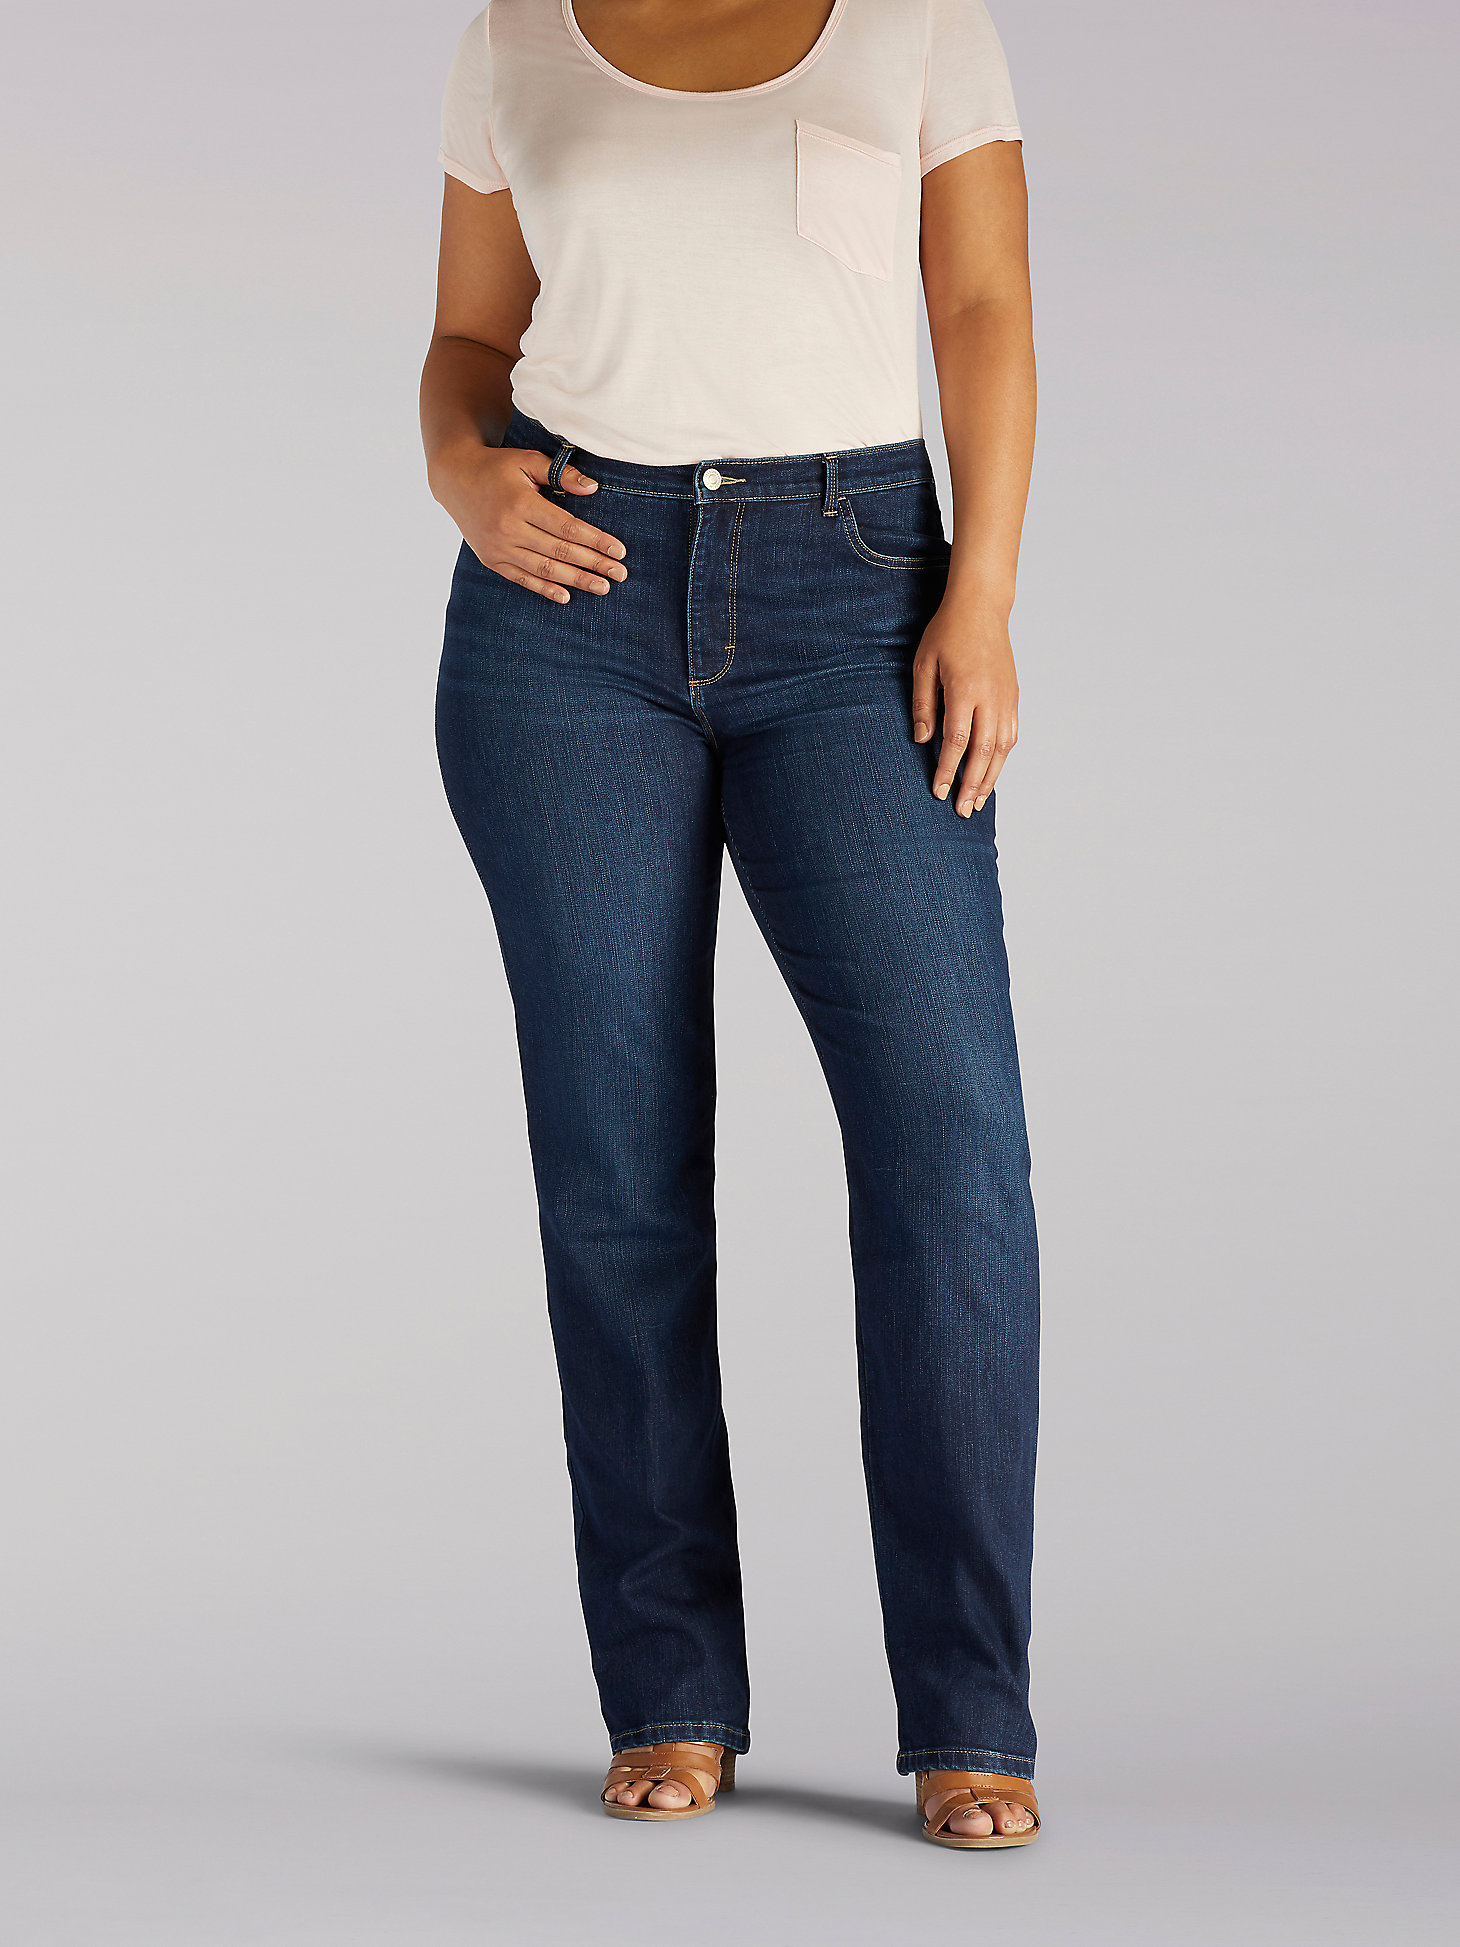 Women`s New NEXT Skinny Stretch Mid Rise Jeans UK Size 6 to 22 in 5 Colours 